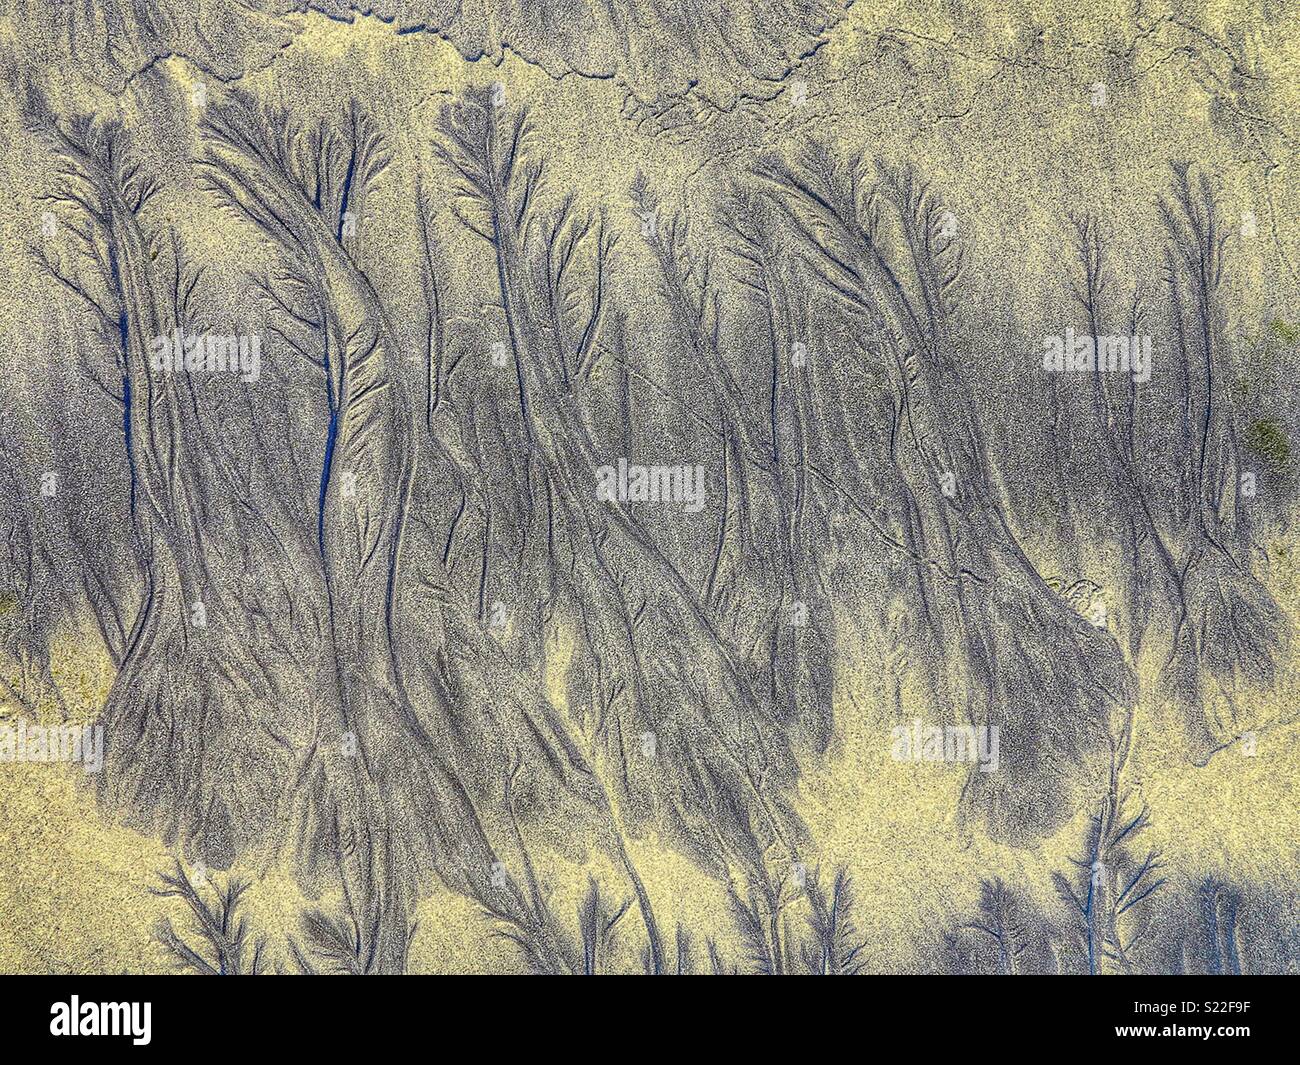 Dendritic drainage patterns on a sandy beach Stock Photo